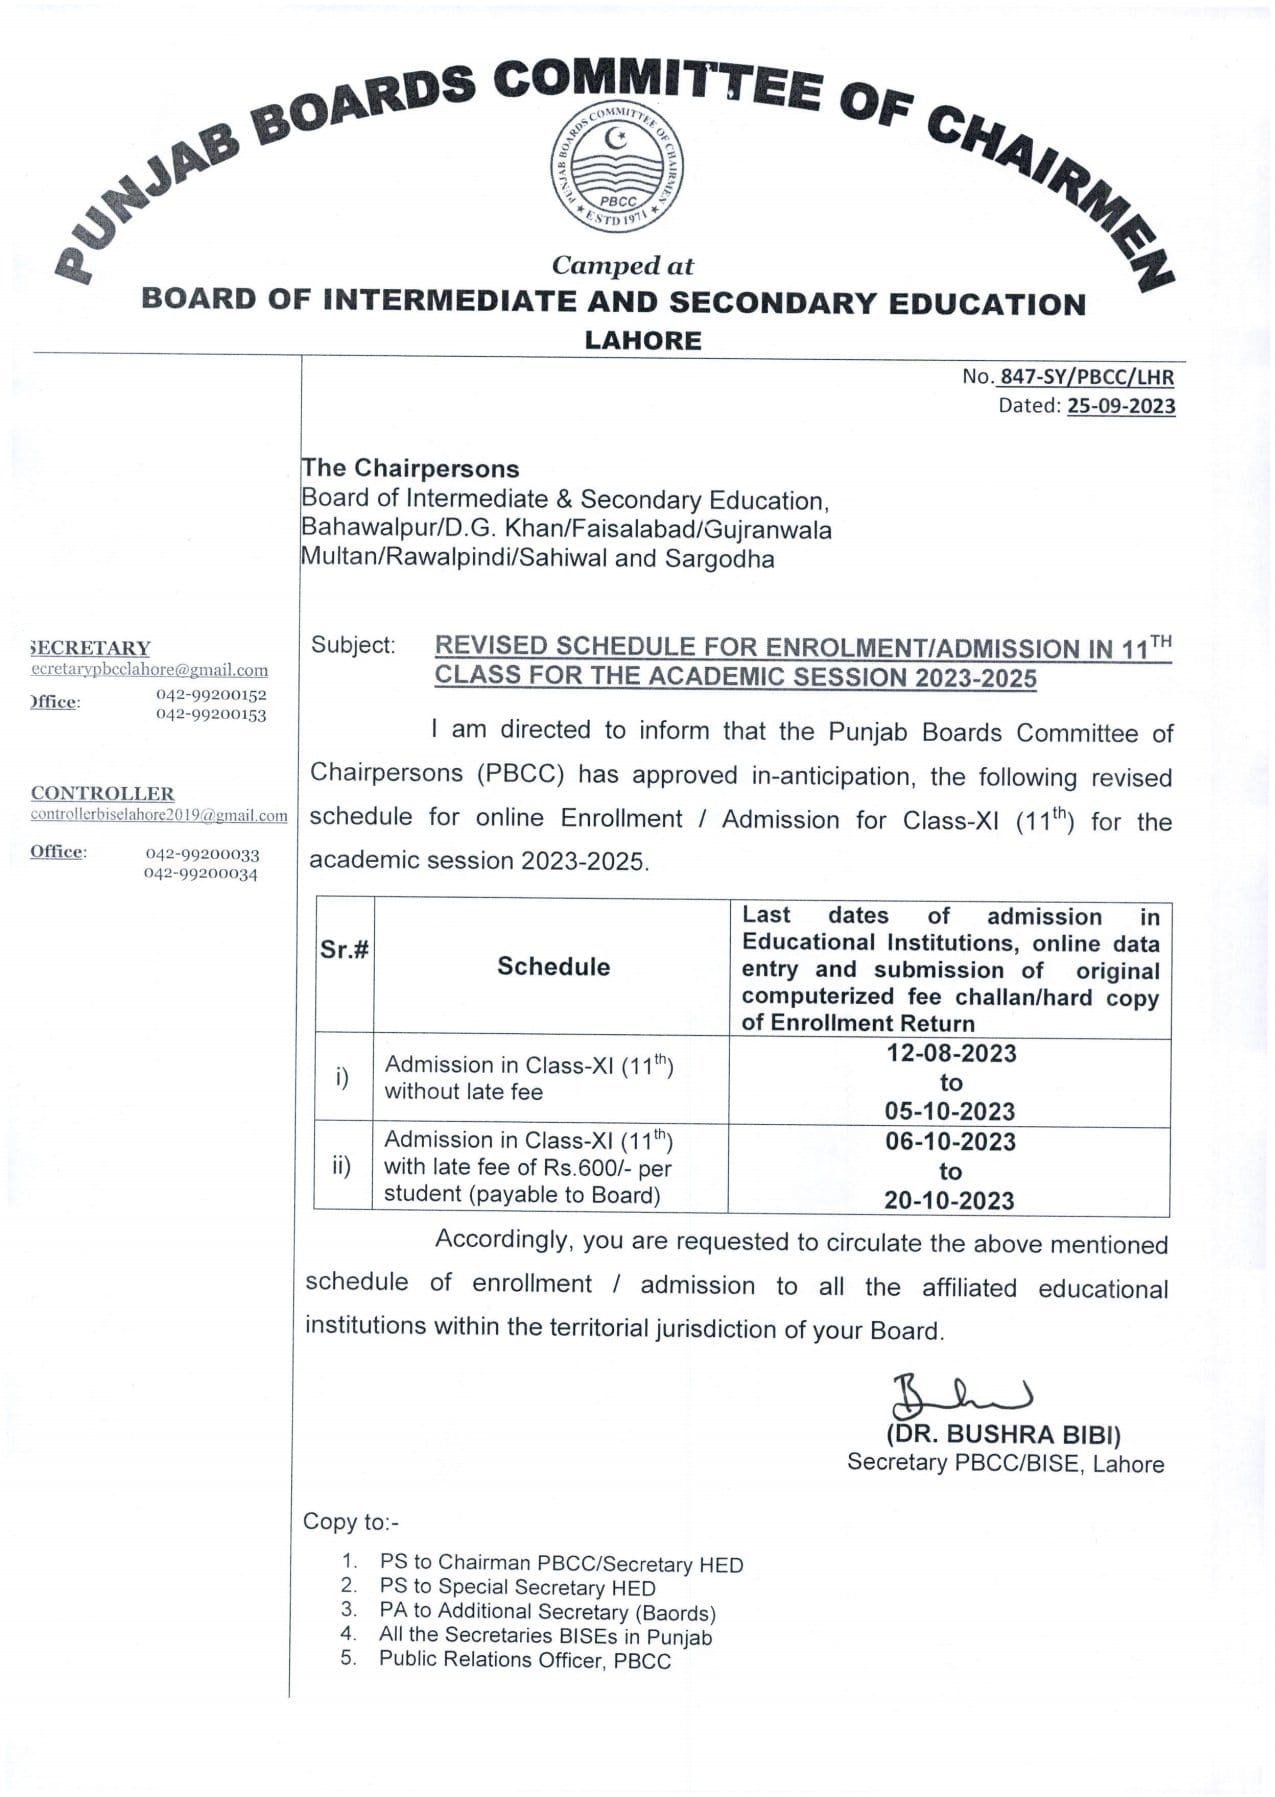 Revised Admissions and Enrollment Schedule for Class XI Session2023-2025 BISE Punjab